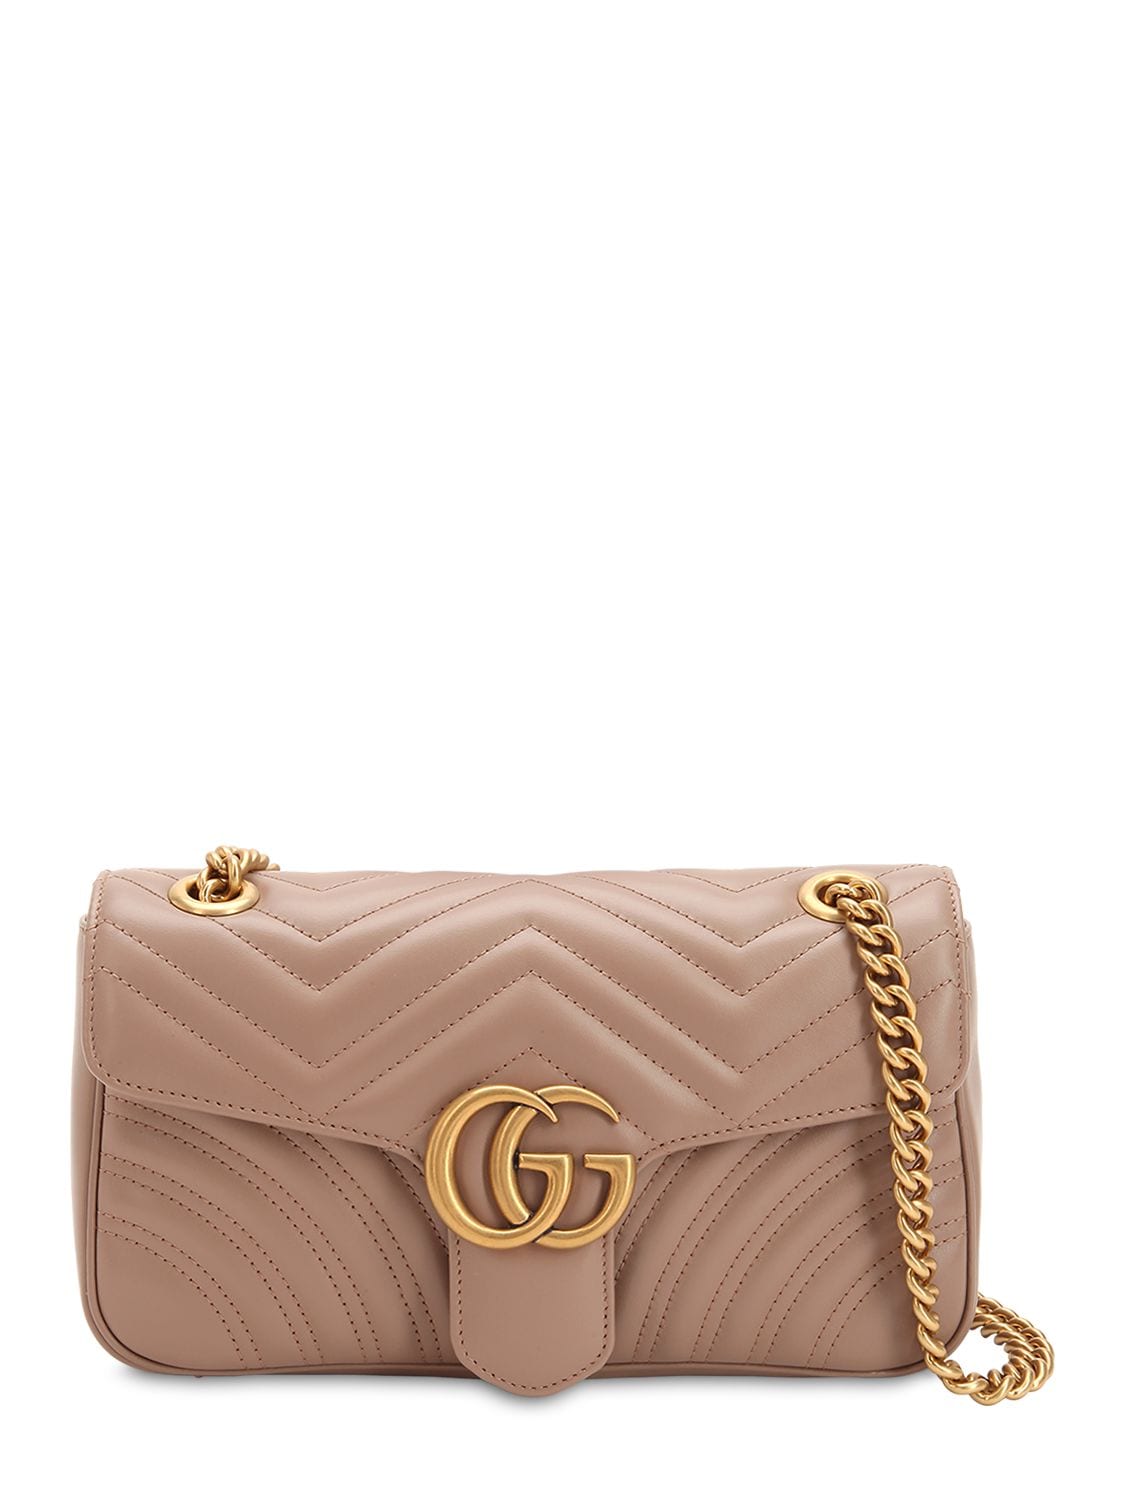 Gucci Small Gg Marmont 2.0 Leather Bag In Nude